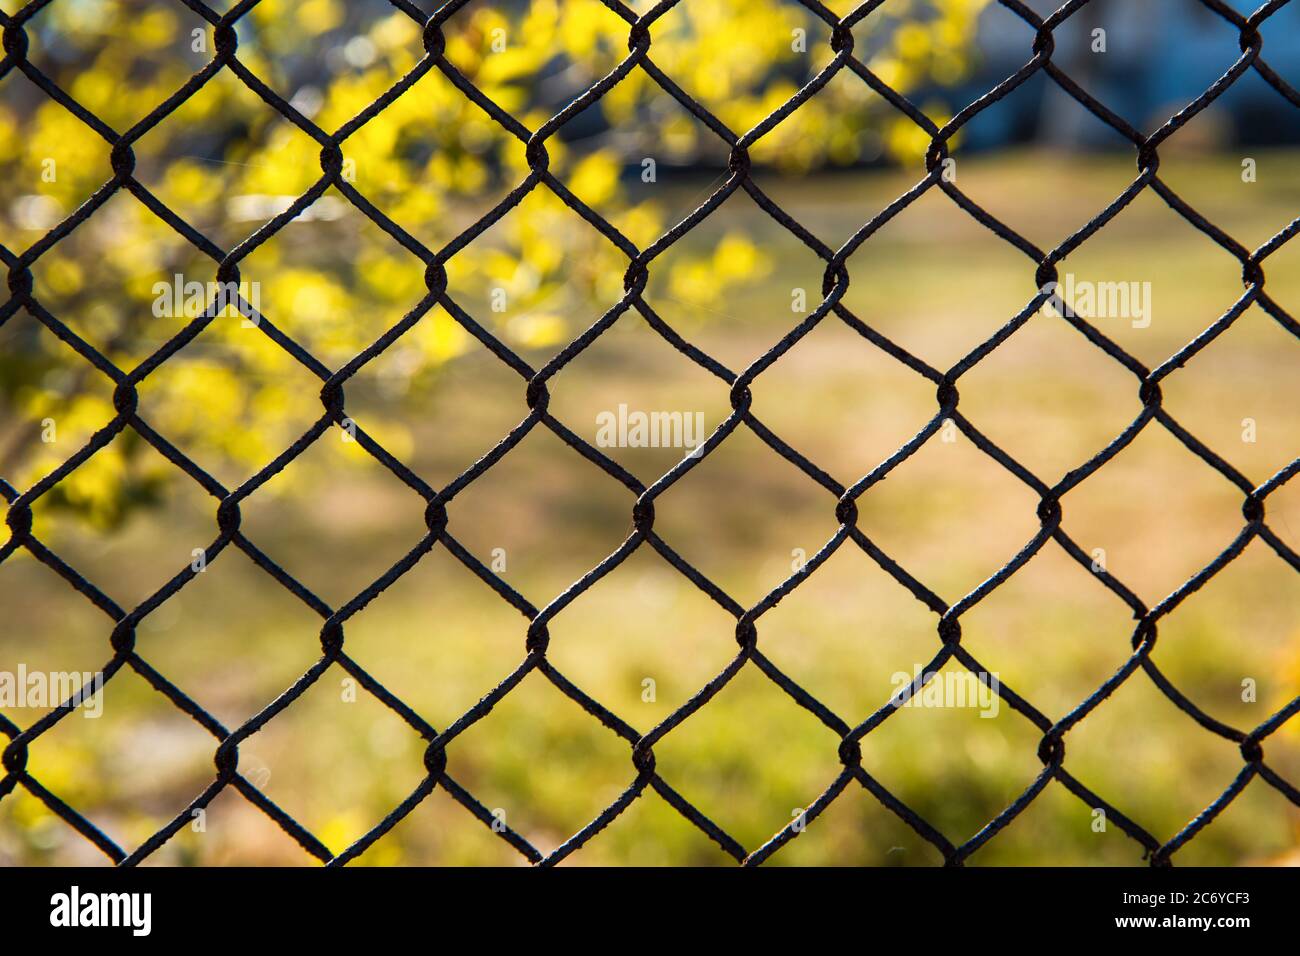 Iron mesh fence on a background of nature. Stock Photo